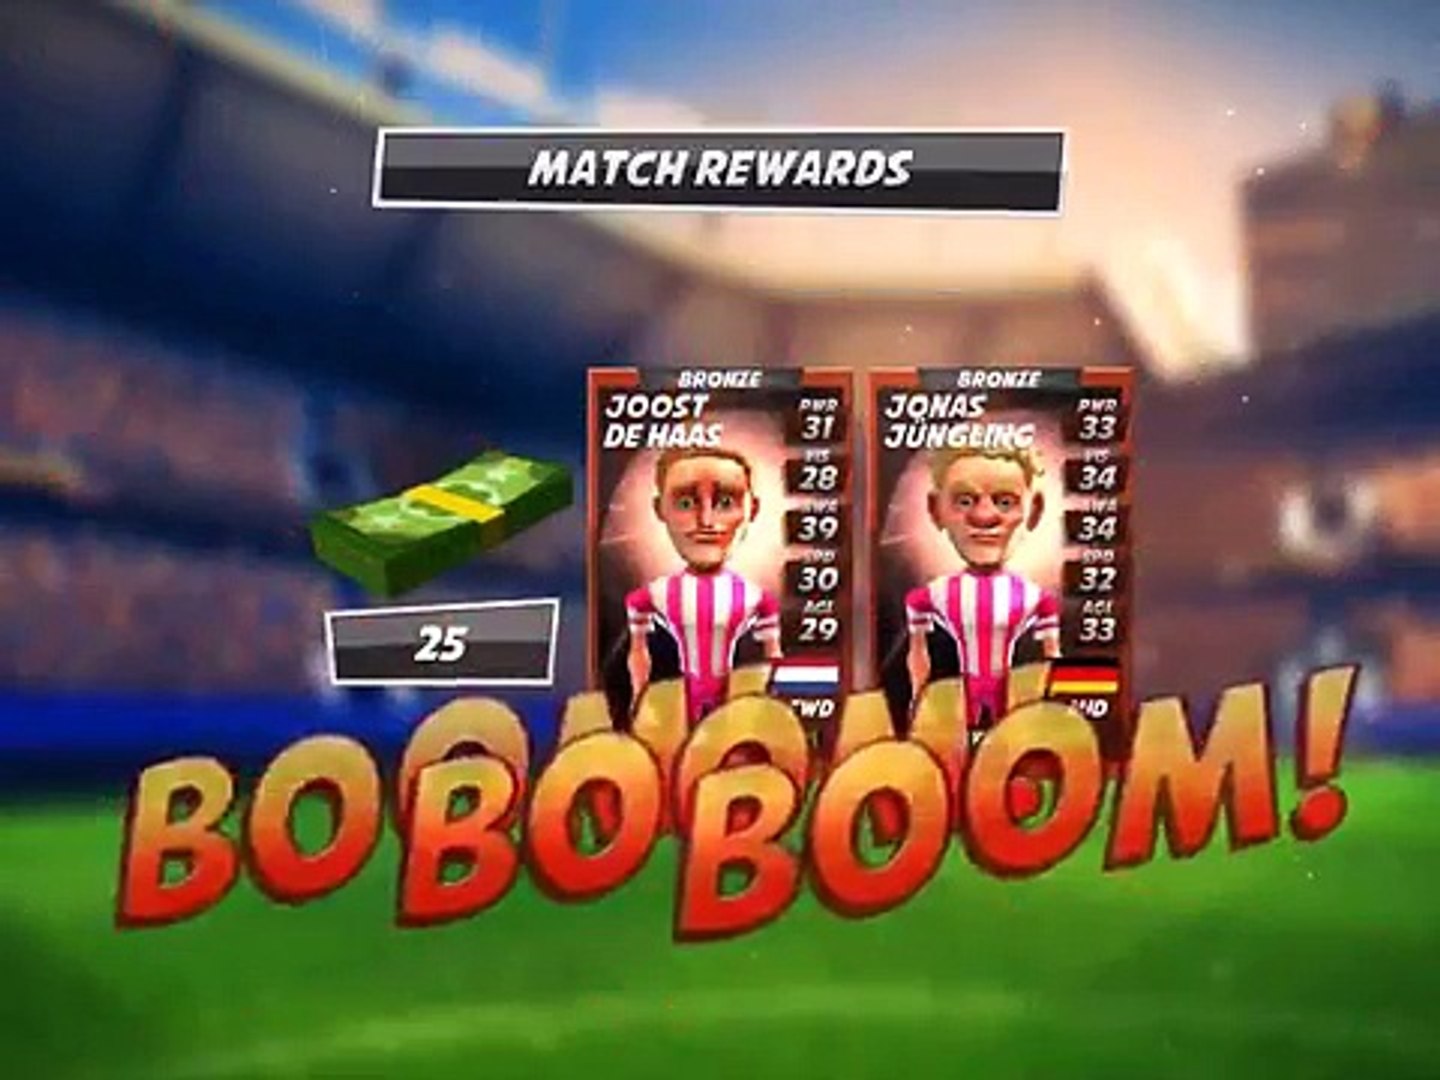 BOOM BOOM SOCCER #2 Android / iOS Gameplay Video